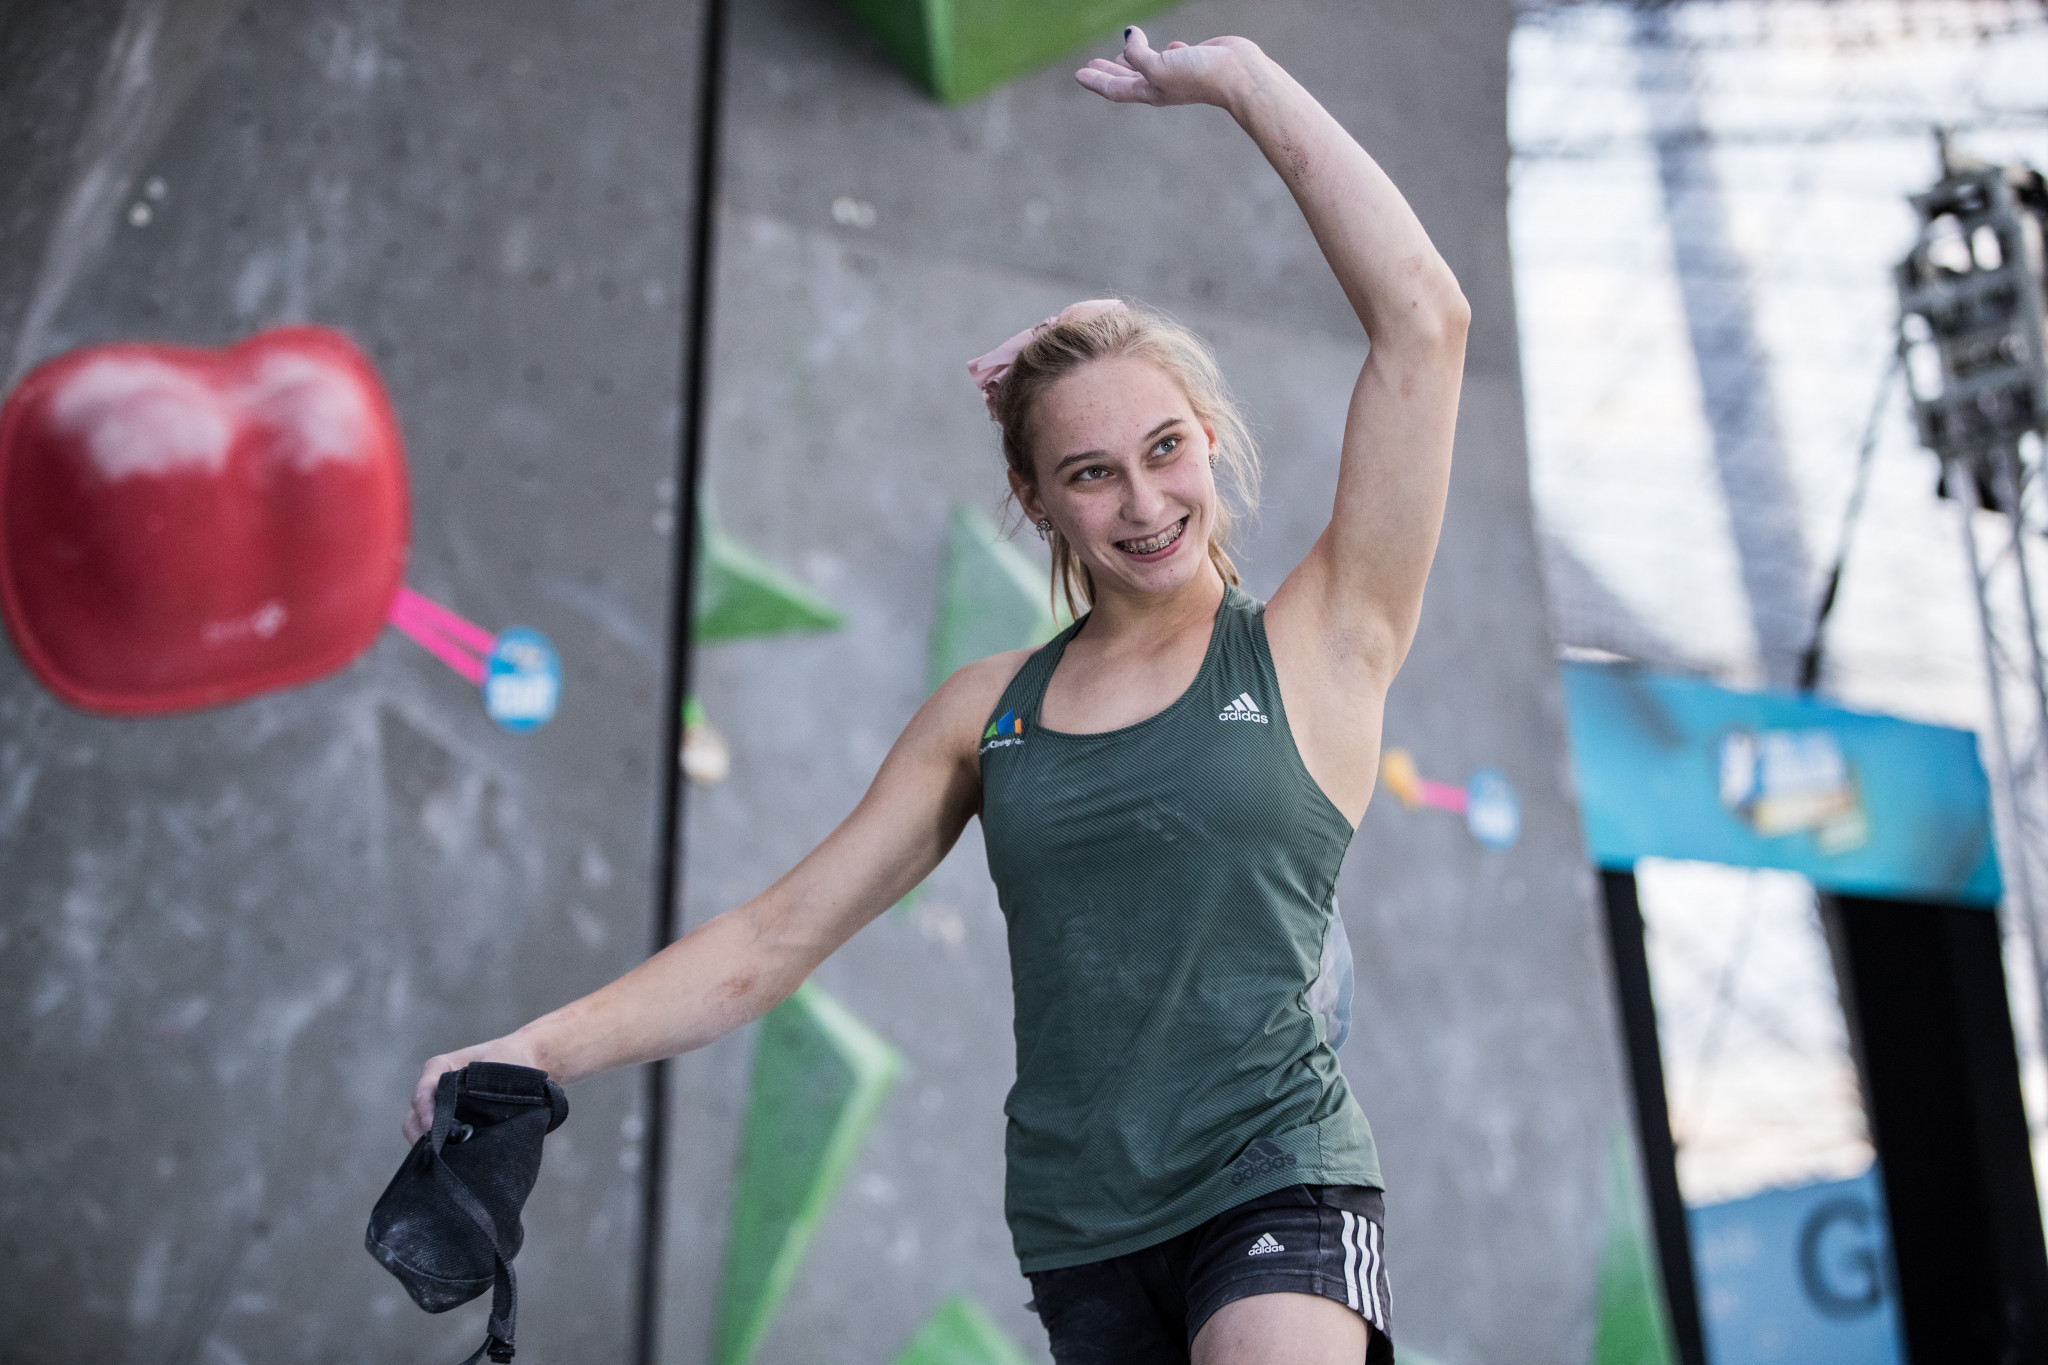 Over 500 climbers assemble in Innsbruck for IFSC Climbing and Paraclimbing World Championships